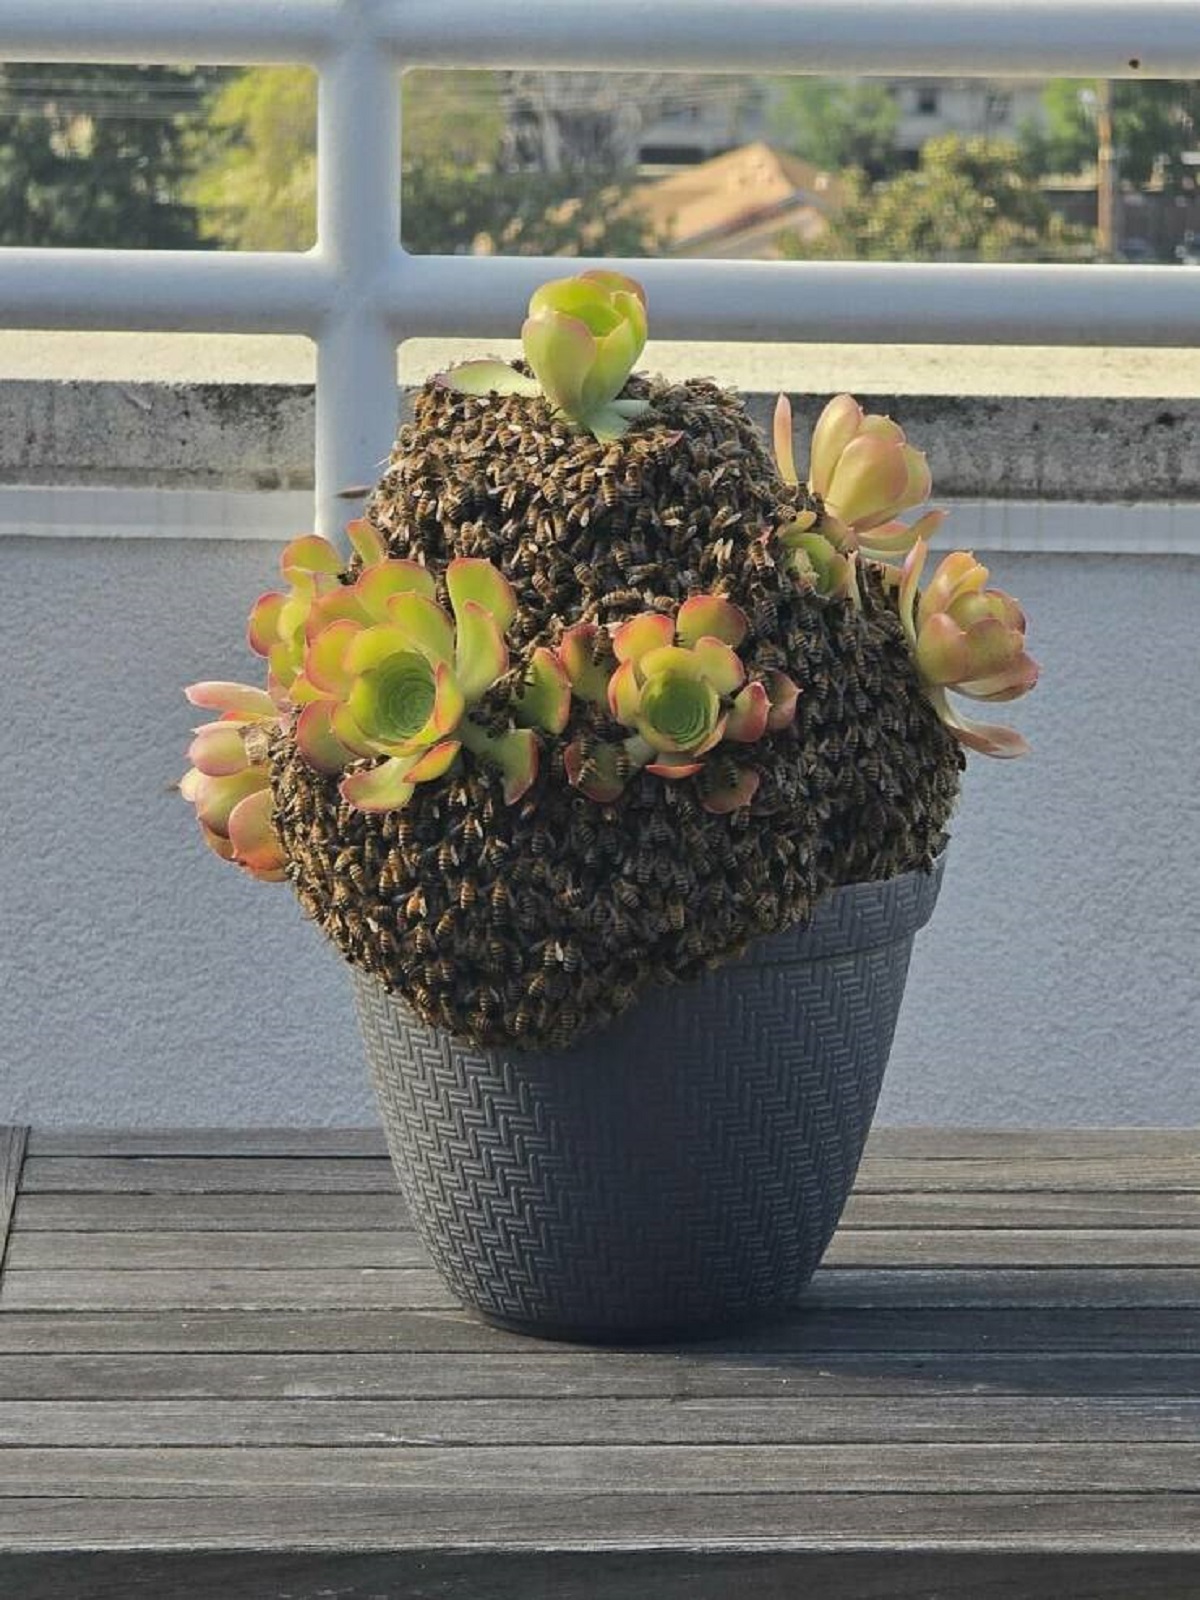 "Bees Swarmed my Plant"